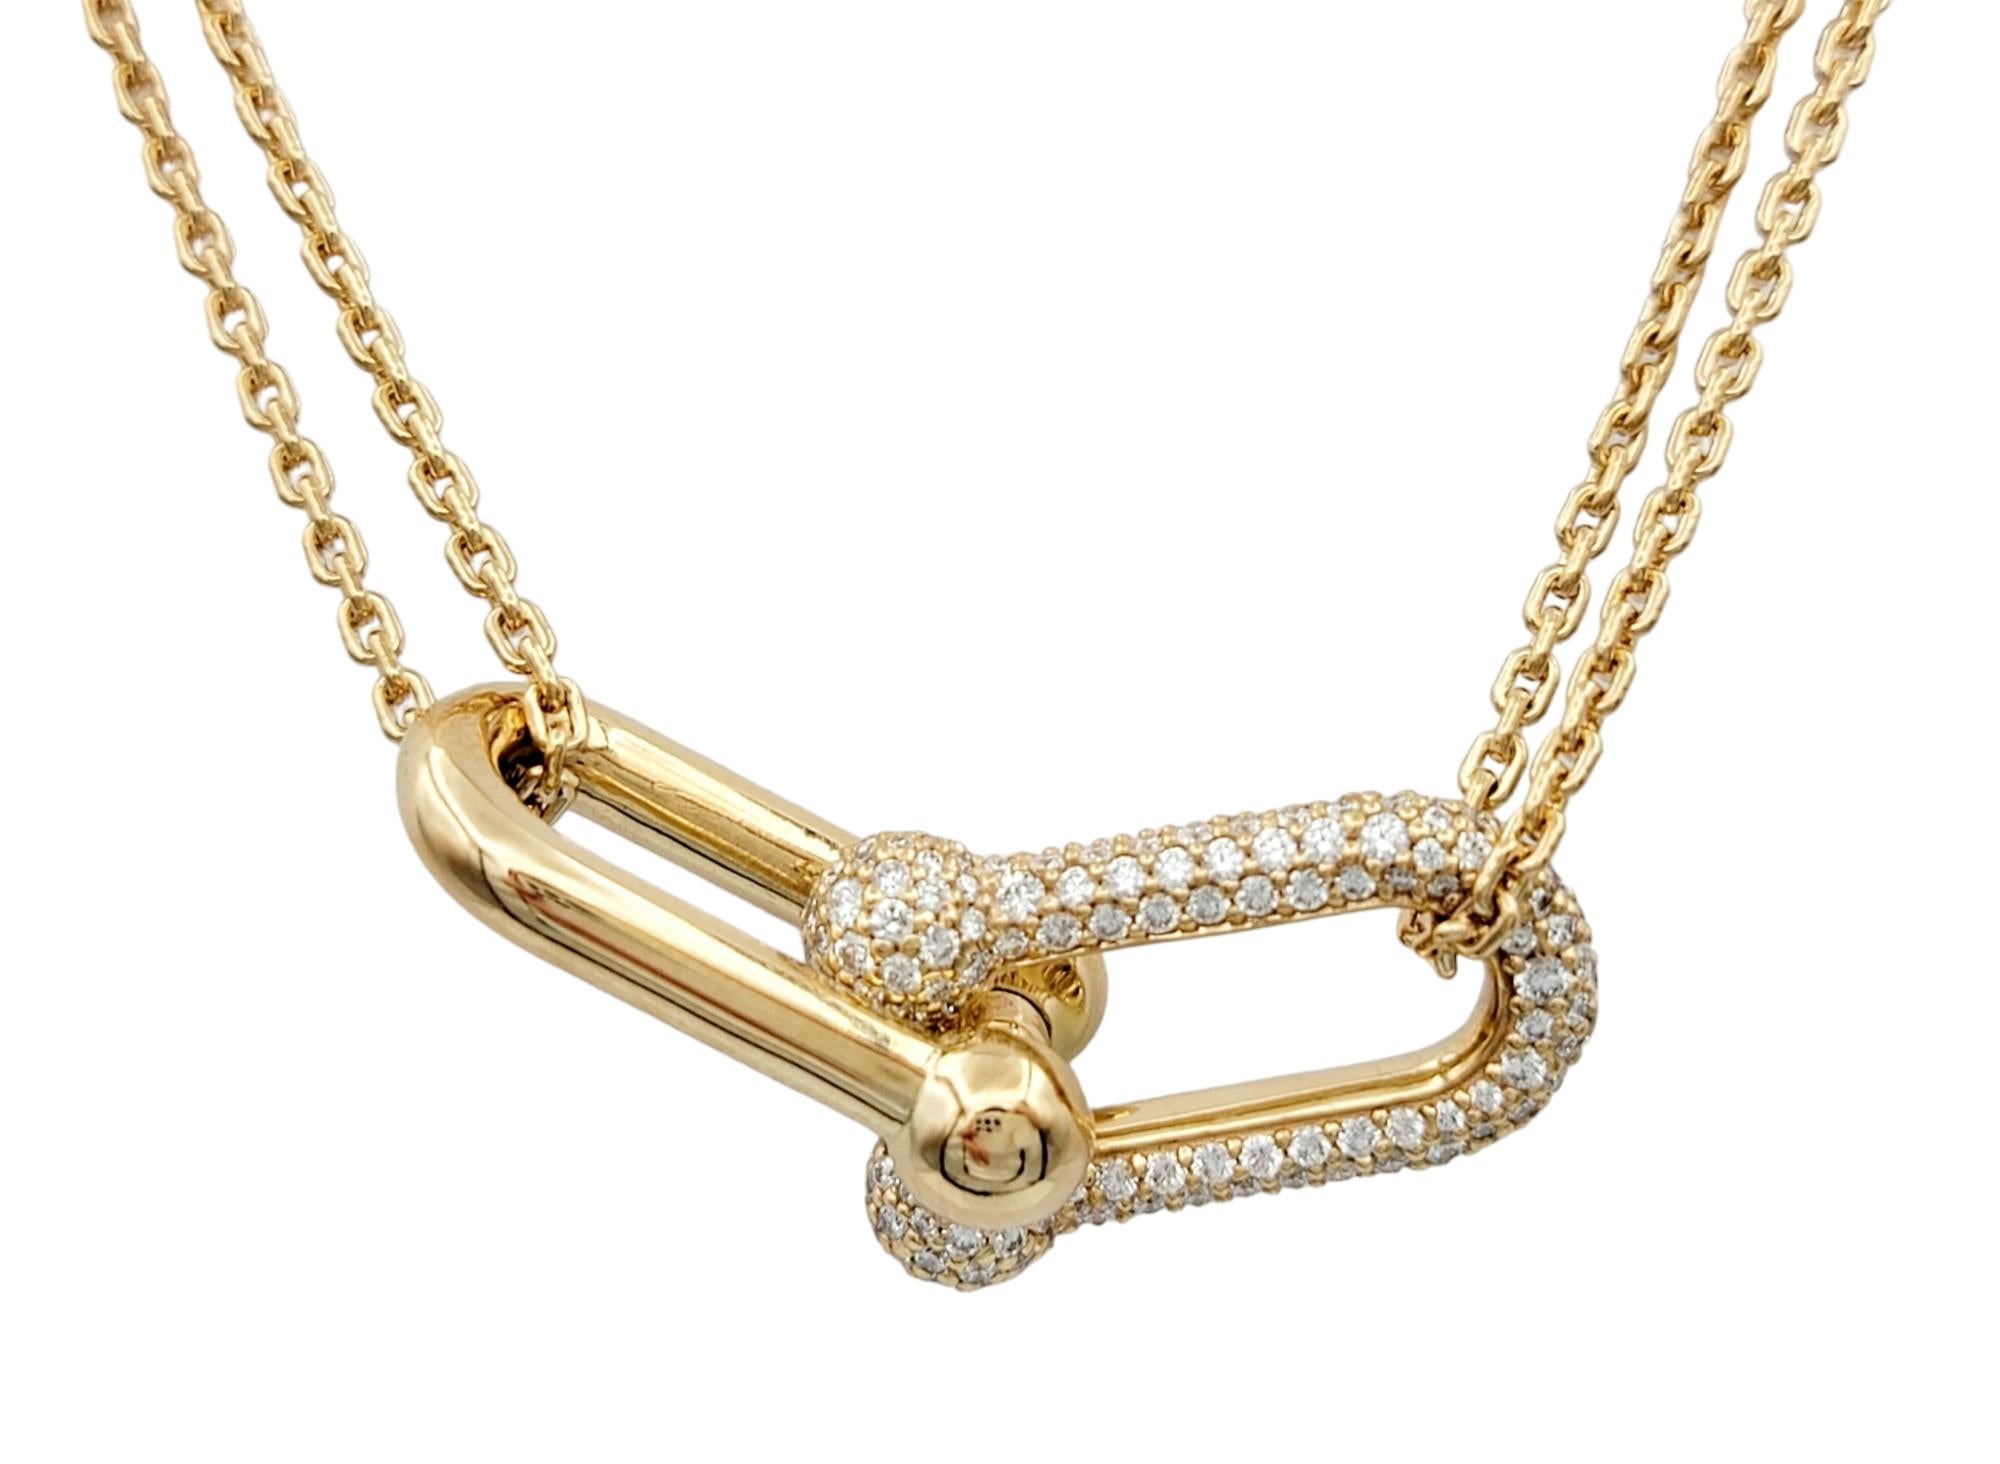 The Tiffany & Co. HardWear Collection exudes a captivating allure with this incredible gold and diamond necklace. Crafted in lustrous 18 karat rose gold, this necklace features a distinctive double-link pendant design suspended from a gracefully